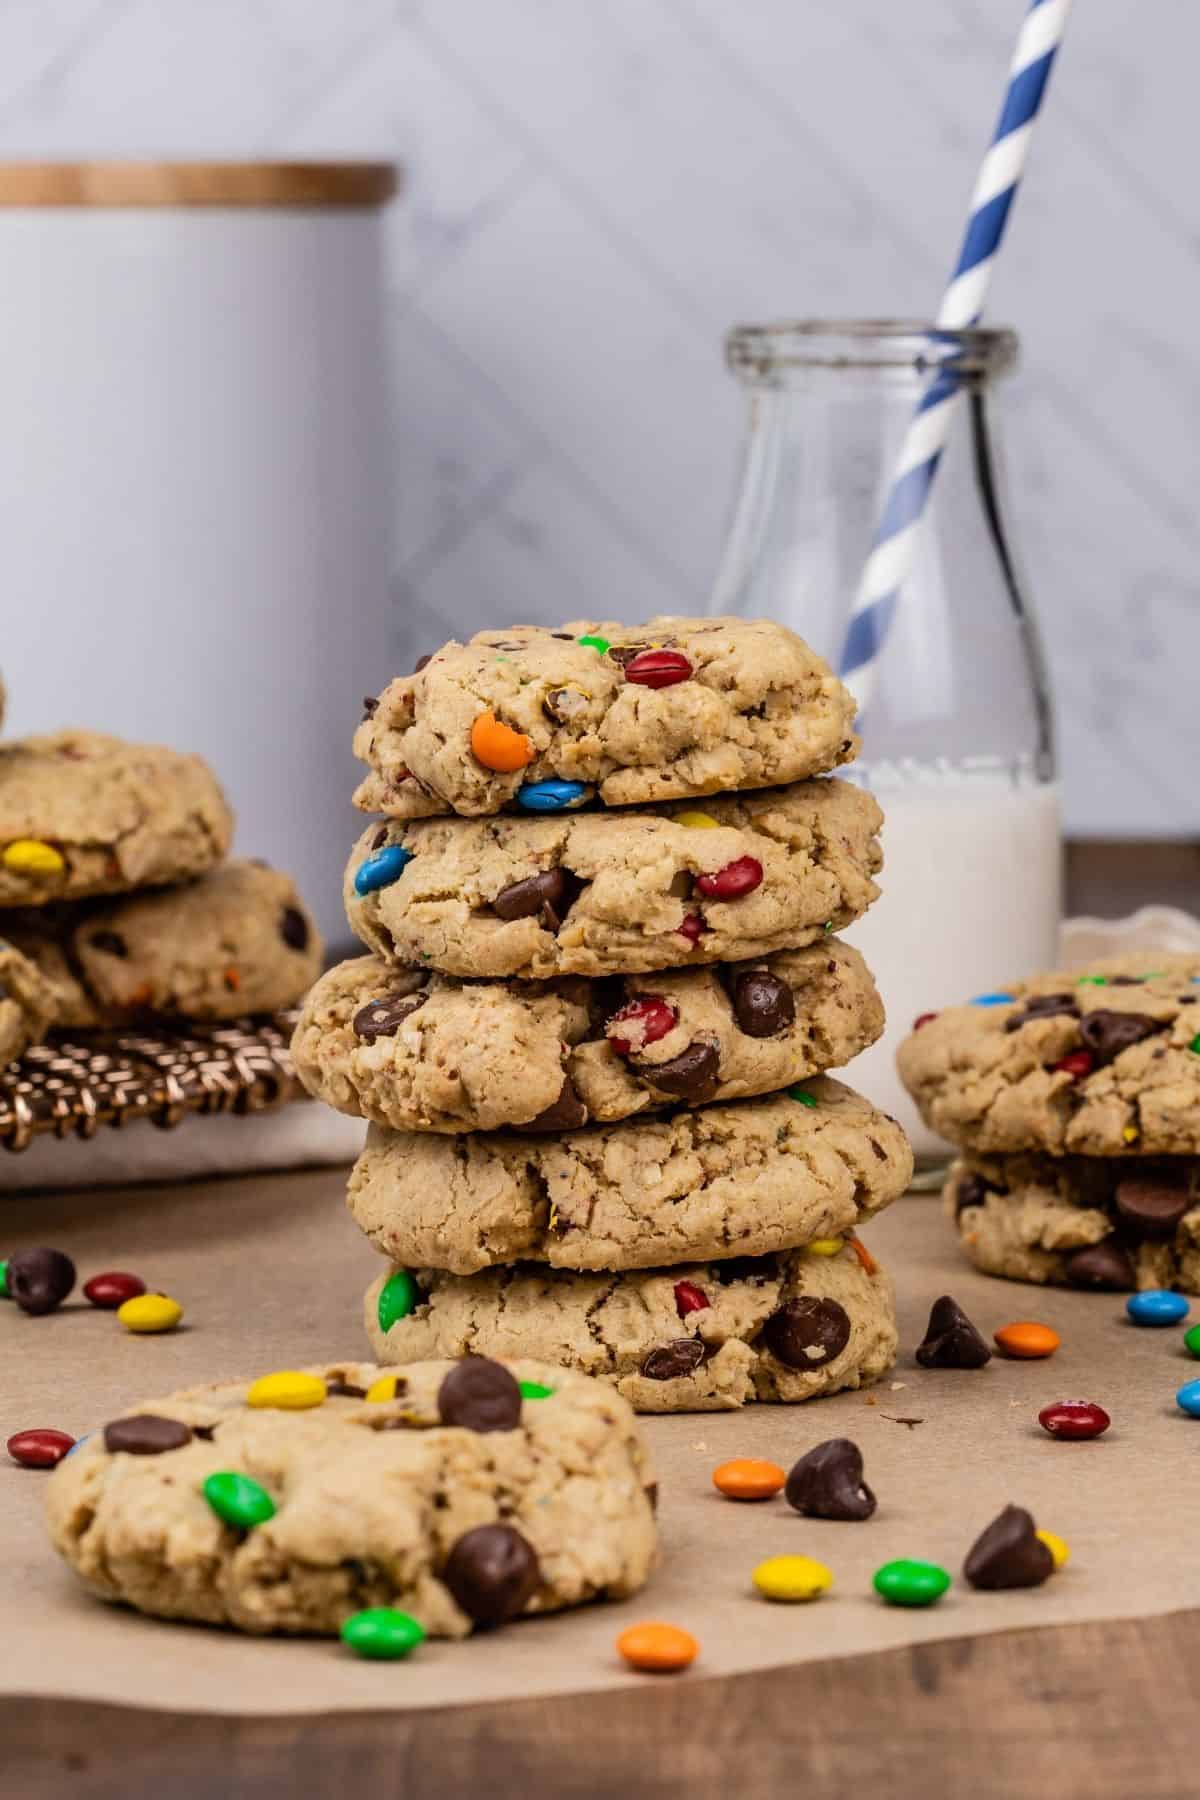 a stack of 5 gluten free monster cookies on parchment paper. more cookies, chocolate chips, and m&ms surround the cookies. a glass of milk with a straw is blurred in the background.